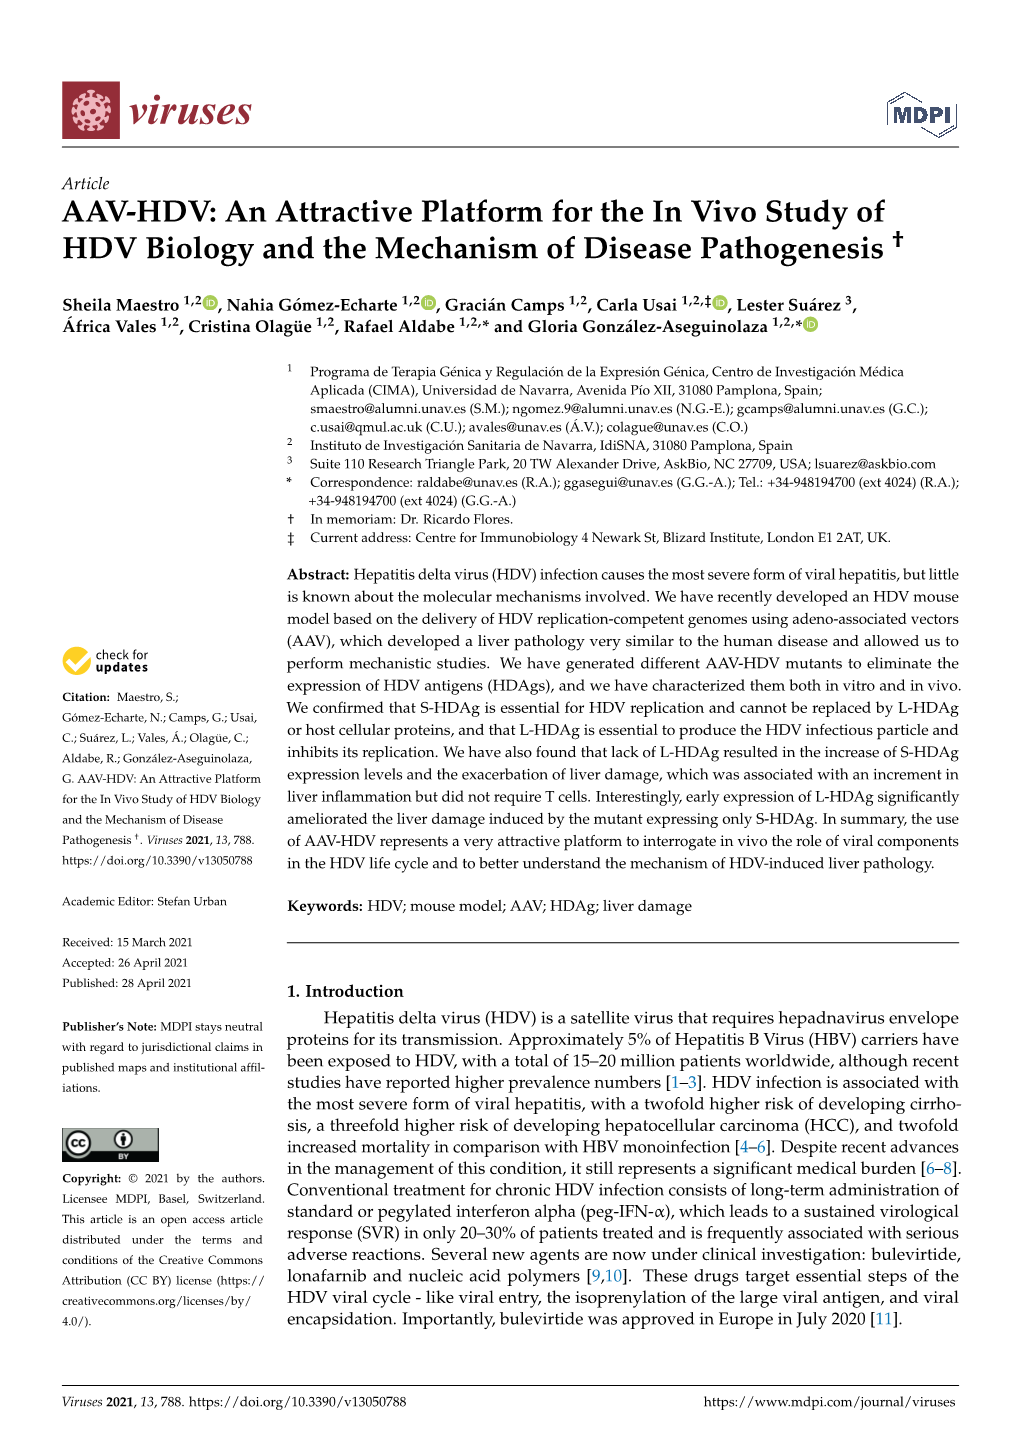 AAV-HDV: an Attractive Platform for the in Vivo Study of HDV Biology and the Mechanism of Disease Pathogenesis †